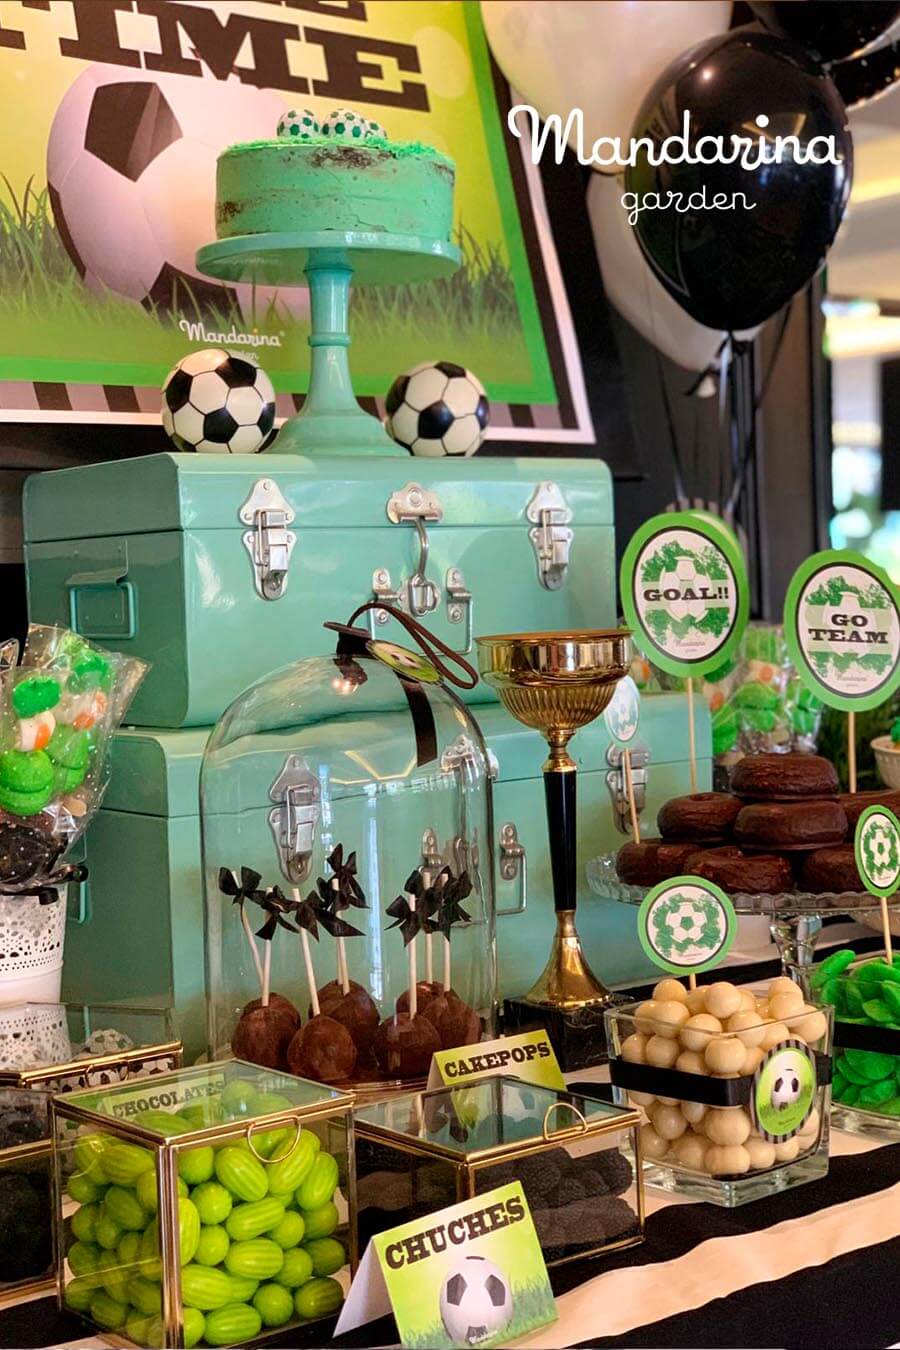 Sweet table decorated with football theme